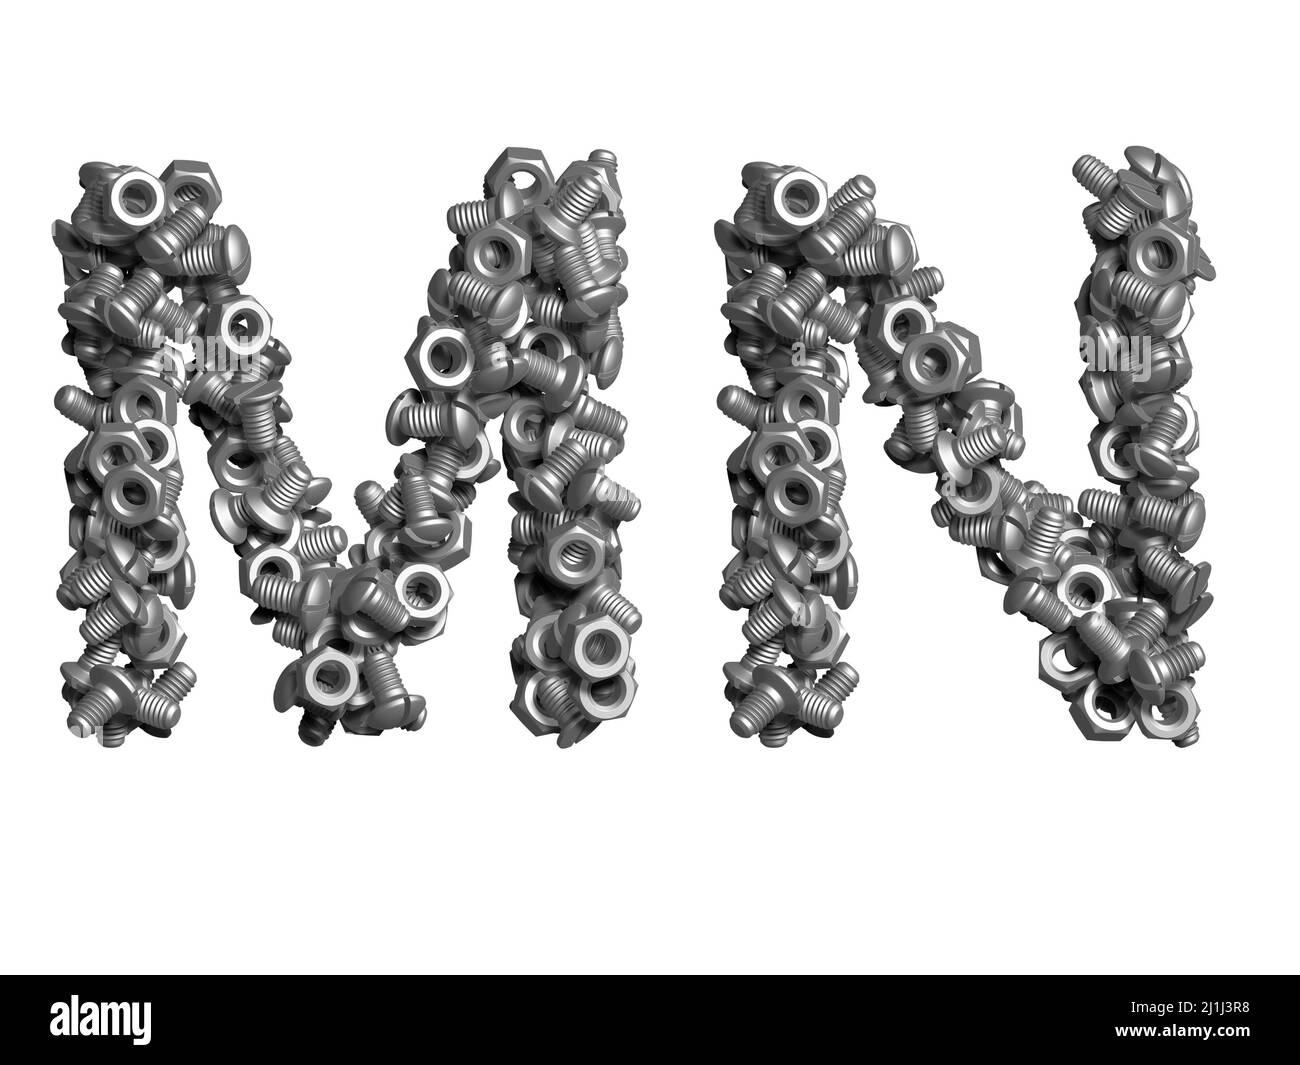 3d alphabet, uppercase letters made of bolts, 3d illustration on white background, M N Stock Photo